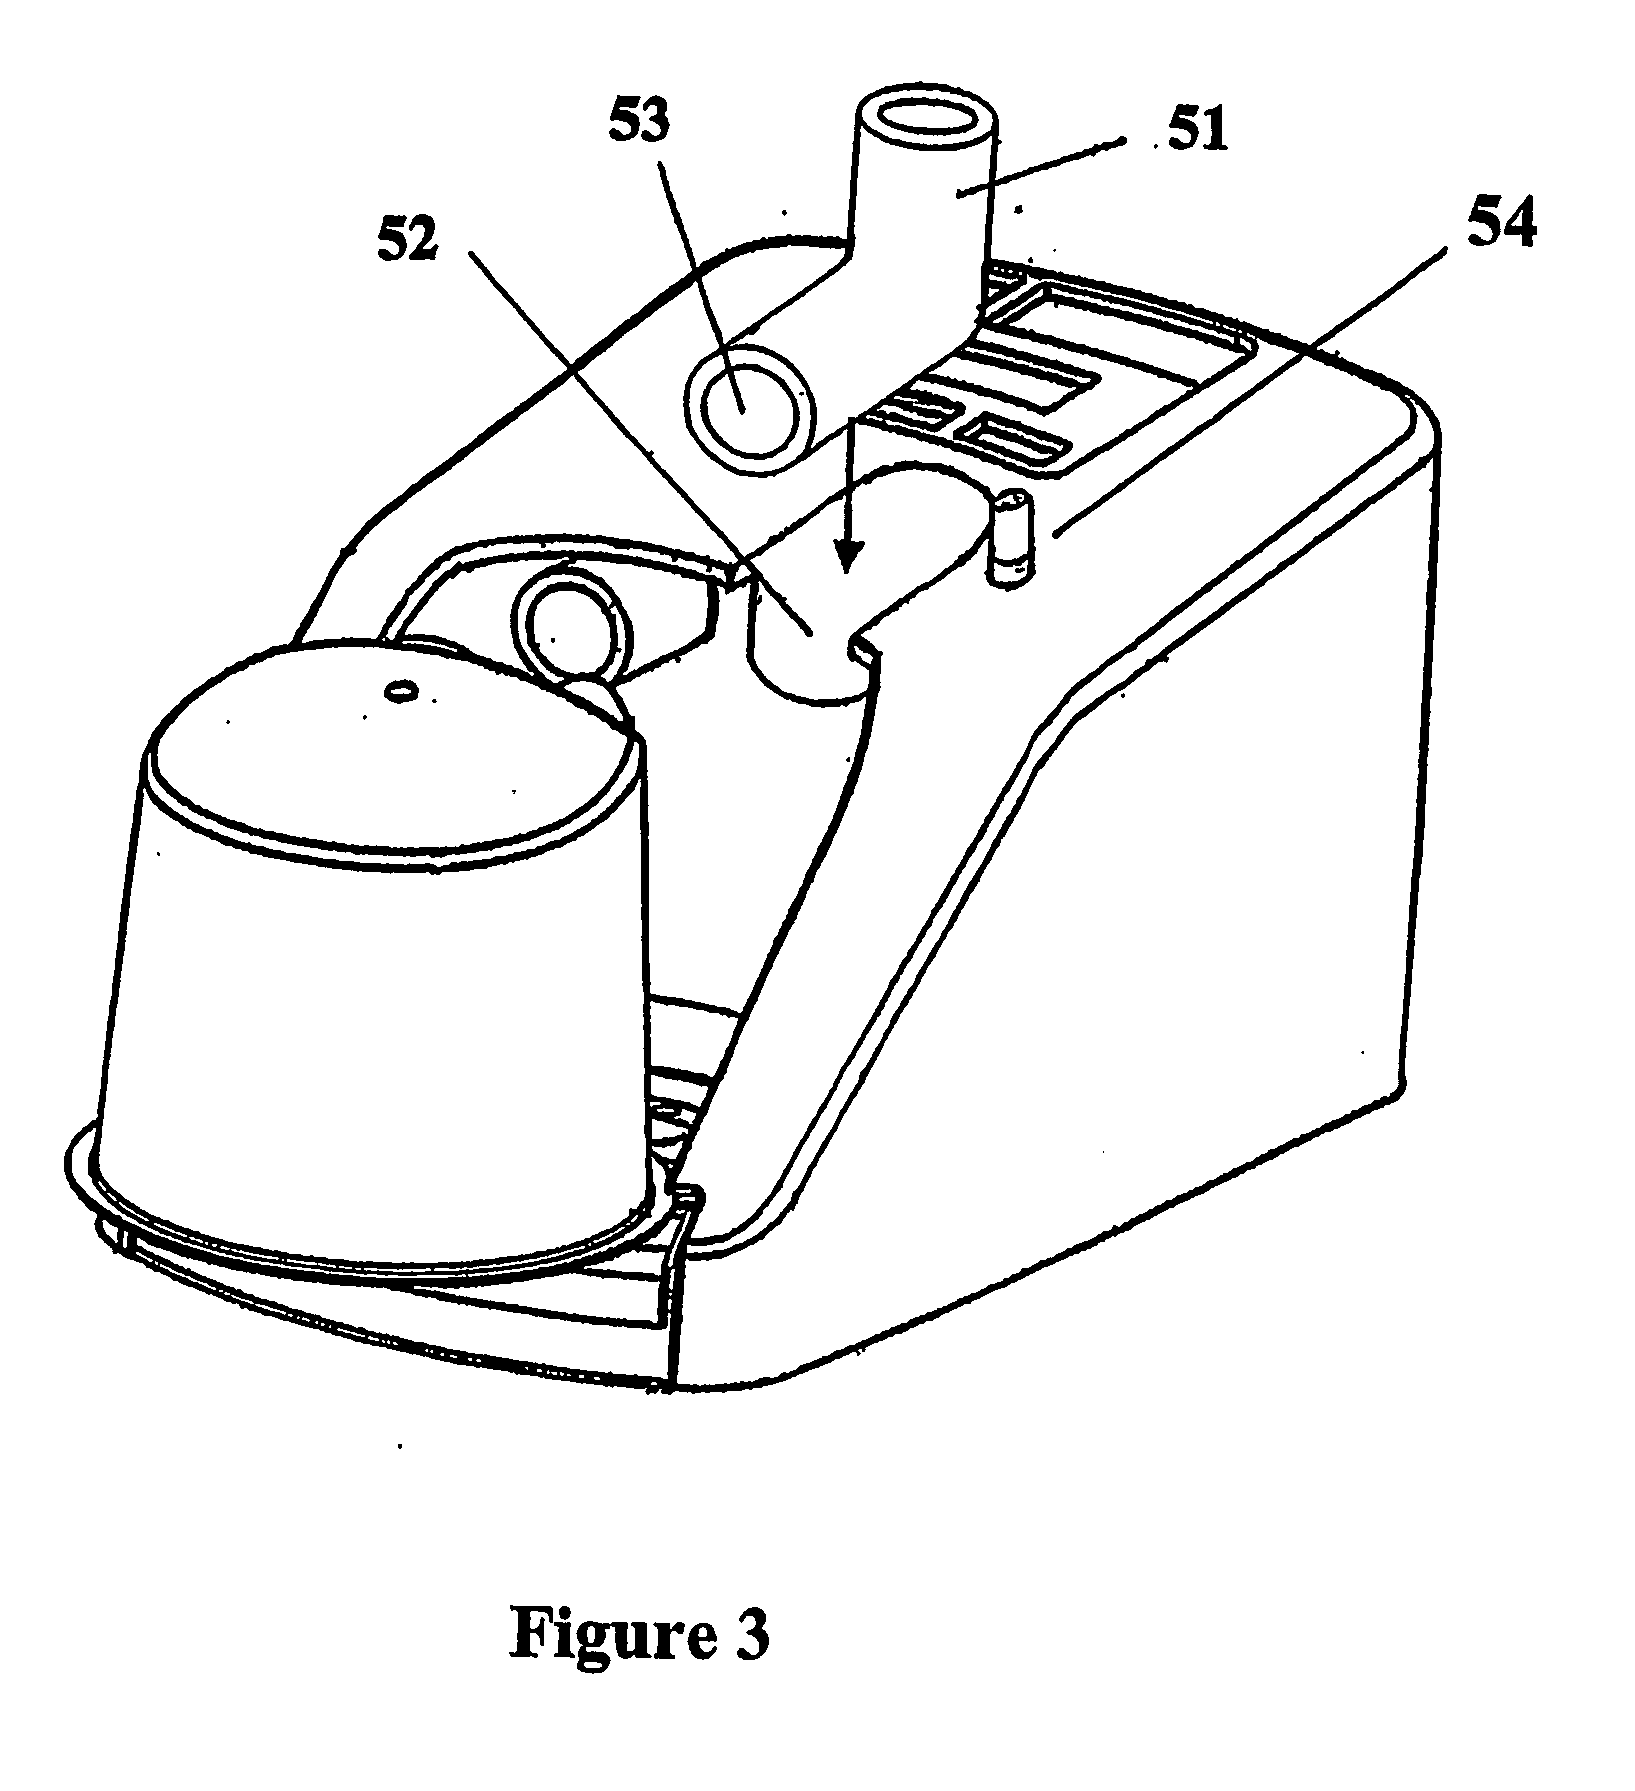 Apparatus for delivering humidified gases